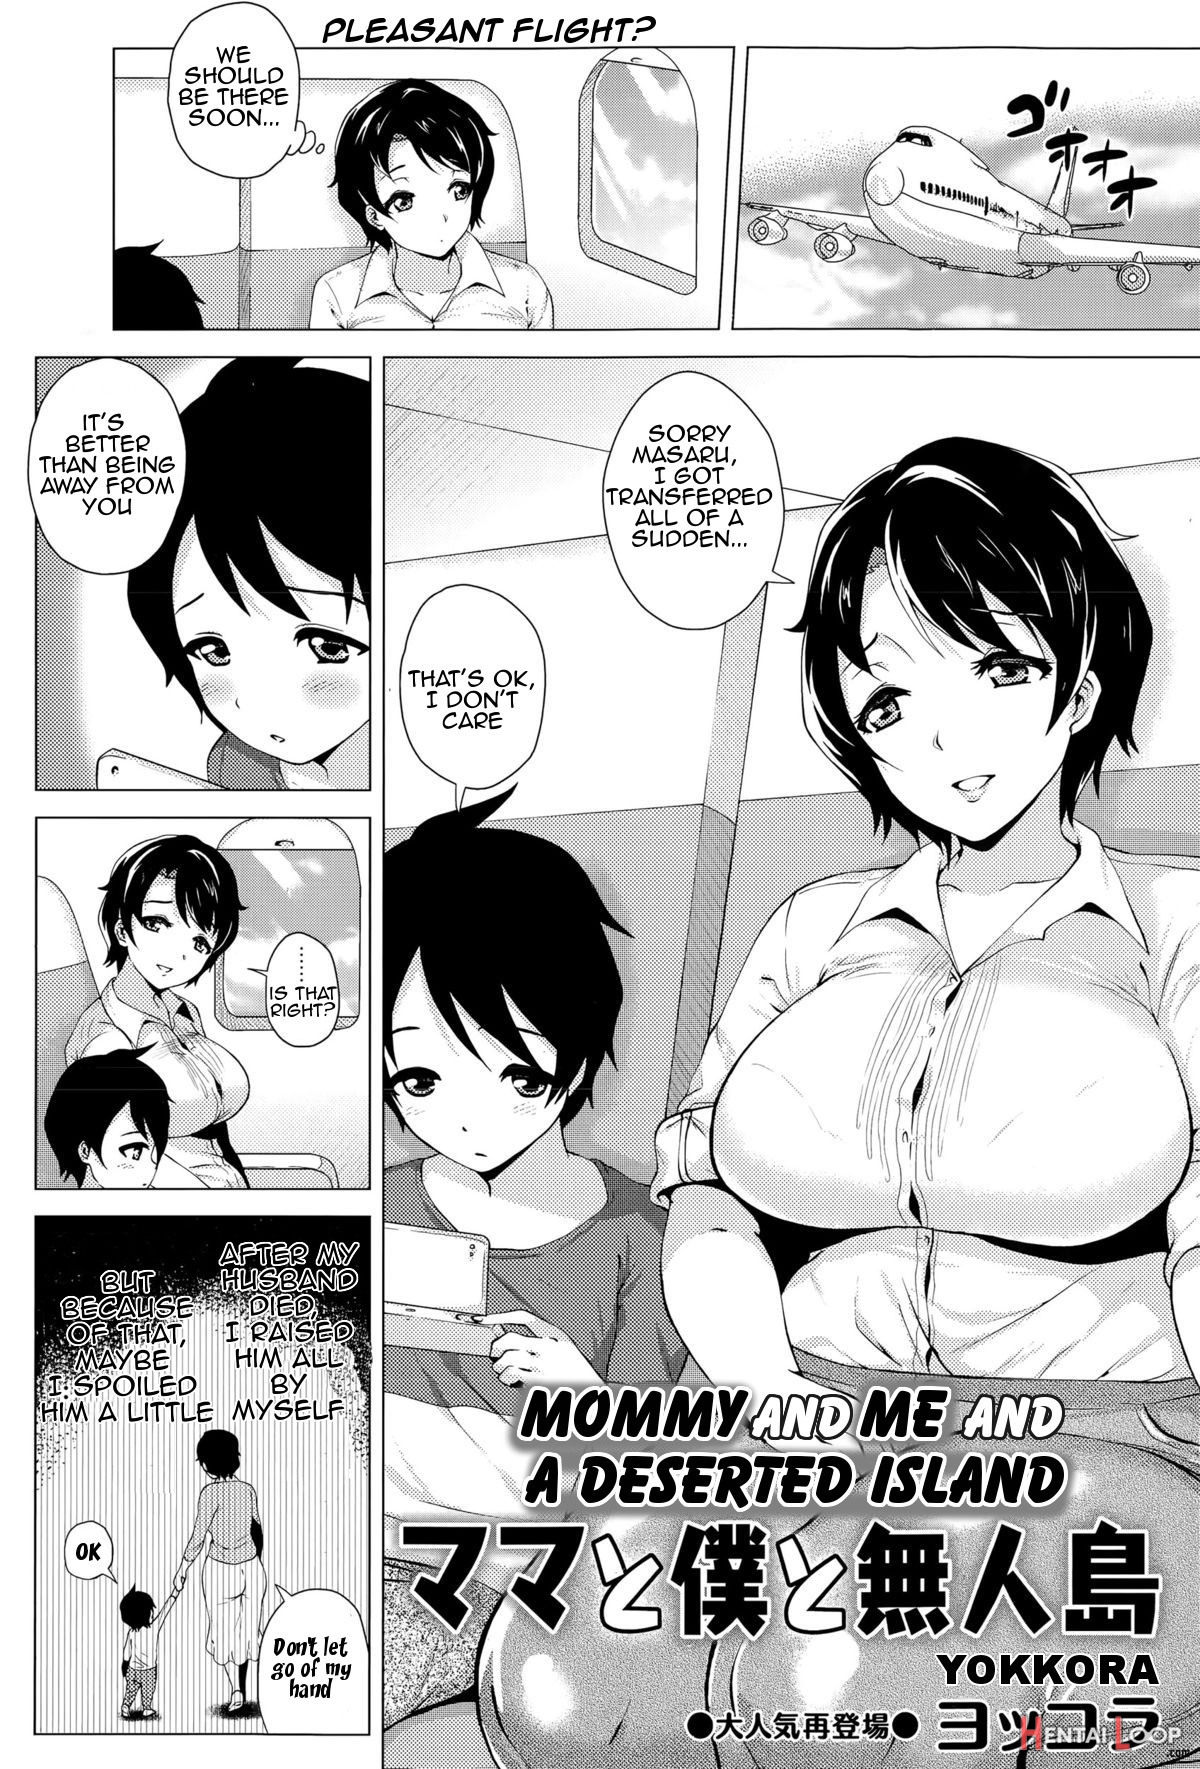 Island Two Mothers - Mommy And Me And A Deserted Island (by Yokkora) - Hentai doujinshi for free  at HentaiLoop